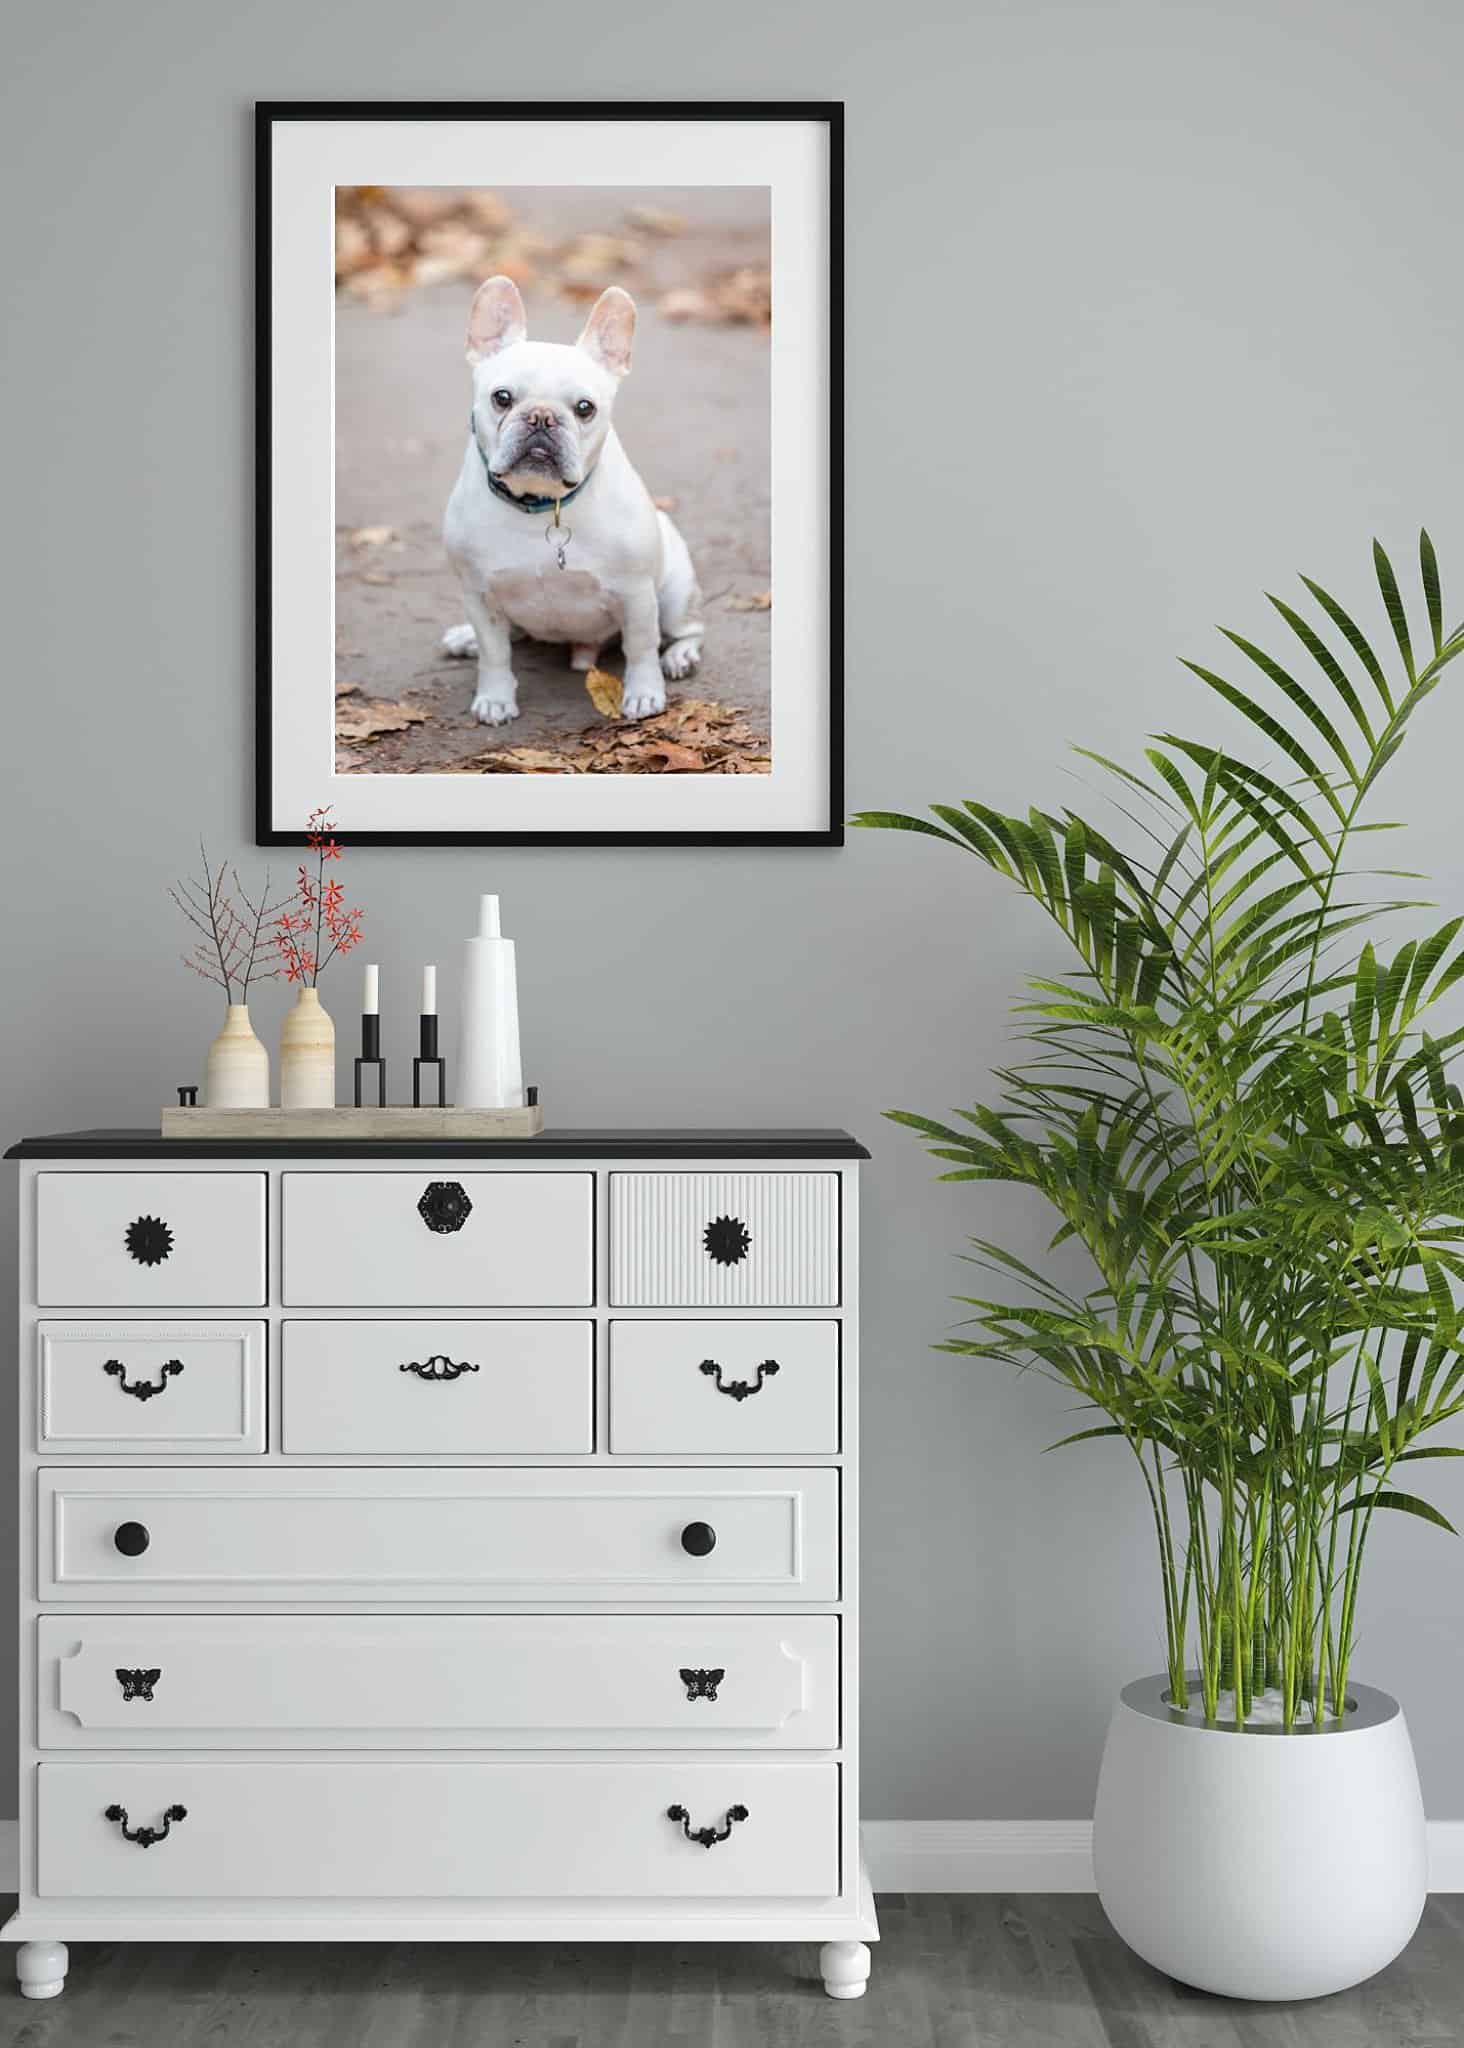 traditional framed print of a fawn Frenchie displayed on a gray wall